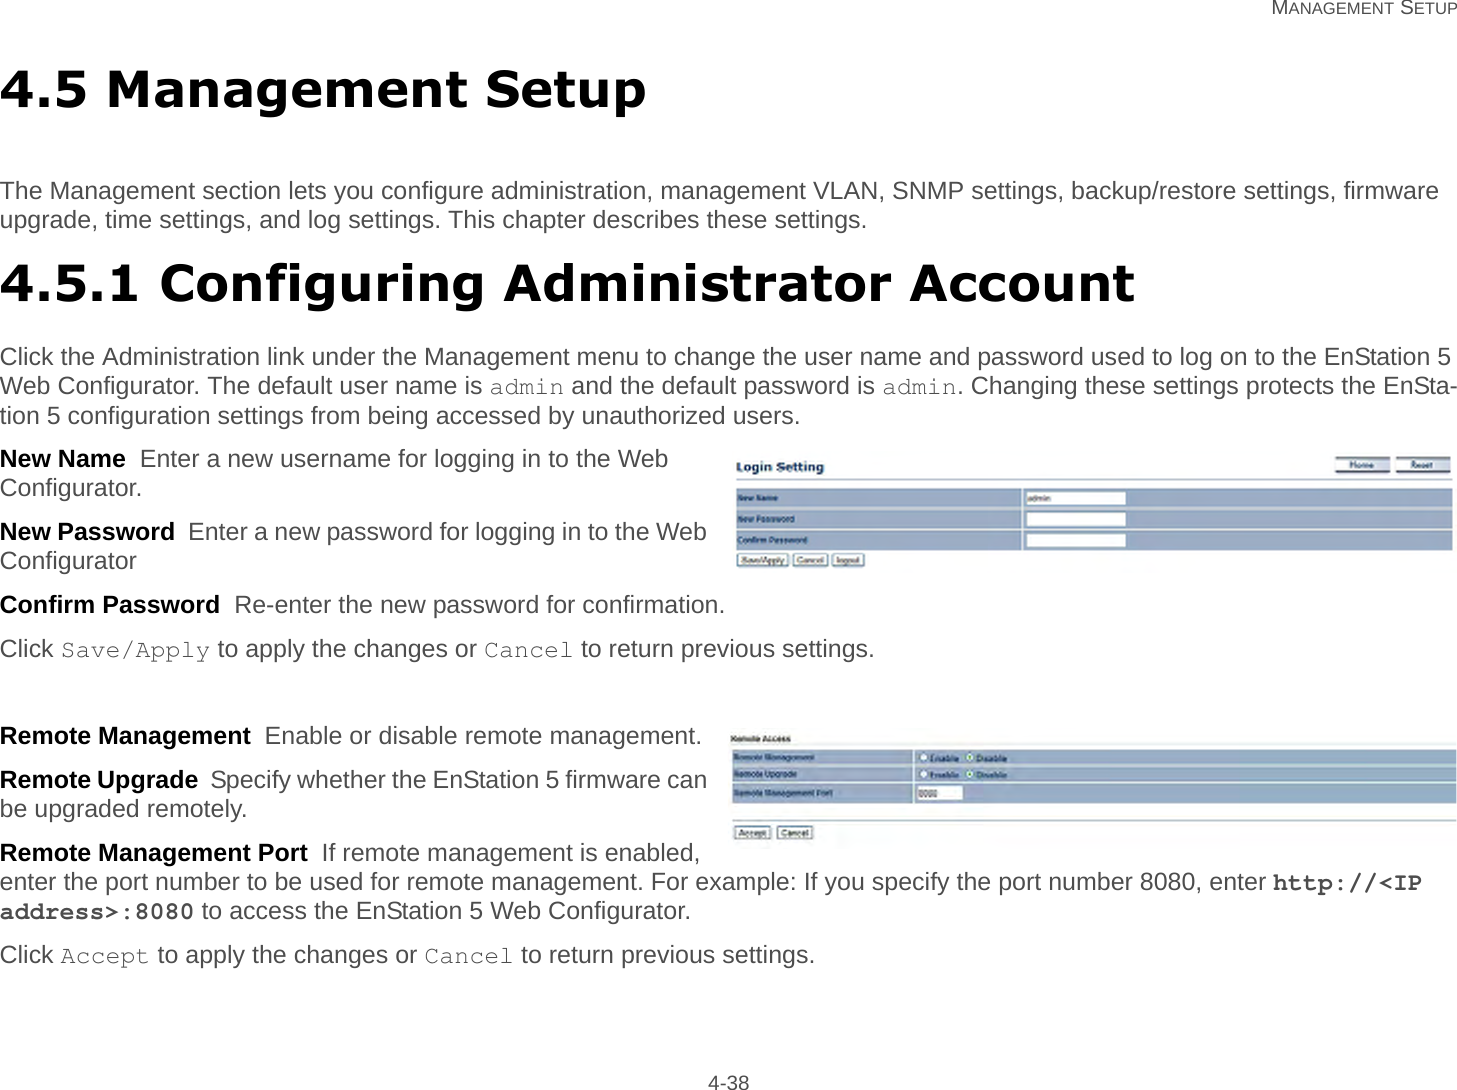   MANAGEMENT SETUP 4-384.5 Management SetupThe Management section lets you configure administration, management VLAN, SNMP settings, backup/restore settings, firmware upgrade, time settings, and log settings. This chapter describes these settings.4.5.1 Configuring Administrator AccountClick the Administration link under the Management menu to change the user name and password used to log on to the EnStation 5 Web Configurator. The default user name is admin and the default password is admin. Changing these settings protects the EnSta-tion 5 configuration settings from being accessed by unauthorized users.New Name  Enter a new username for logging in to the Web Configurator.New Password  Enter a new password for logging in to the Web ConfiguratorConfirm Password  Re-enter the new password for confirmation.Click Save/Apply to apply the changes or Cancel to return previous settings.Remote Management  Enable or disable remote management.Remote Upgrade  Specify whether the EnStation 5 firmware can be upgraded remotely.Remote Management Port  If remote management is enabled, enter the port number to be used for remote management. For example: If you specify the port number 8080, enter http://&lt;IP address&gt;:8080 to access the EnStation 5 Web Configurator.Click Accept to apply the changes or Cancel to return previous settings.